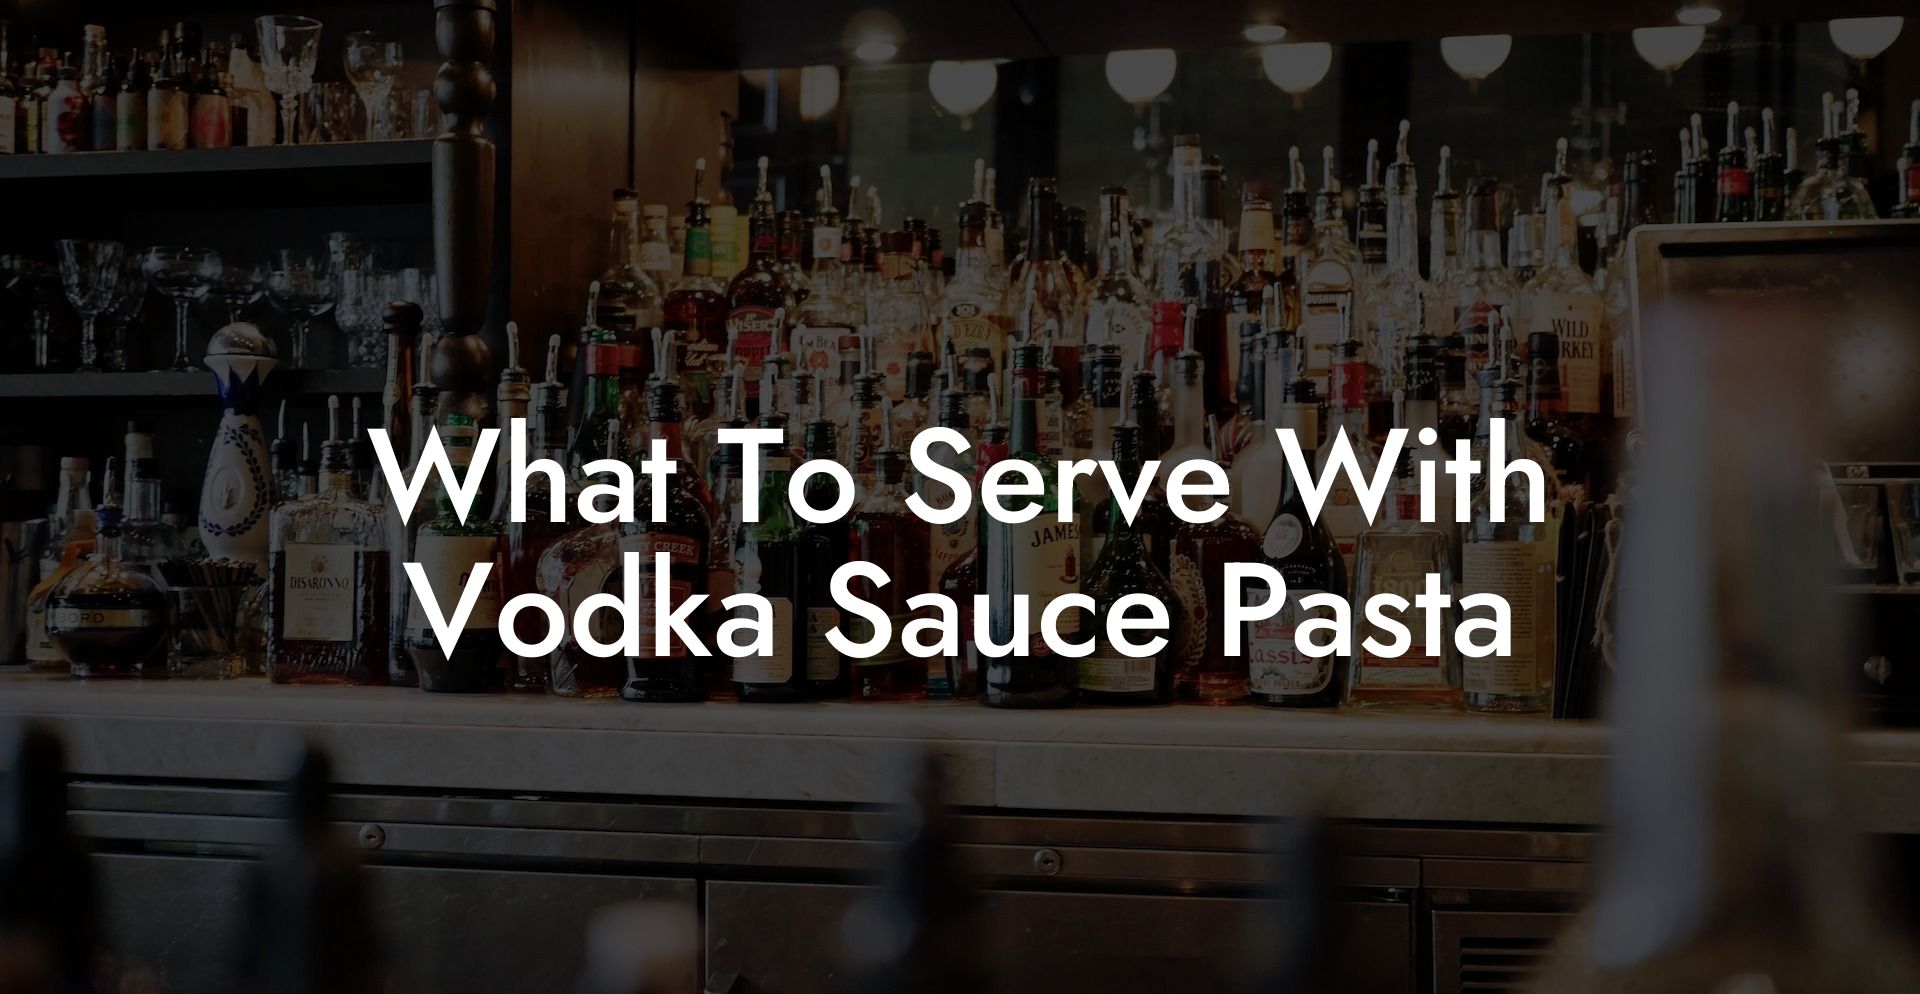 What To Serve With Vodka Sauce Pasta